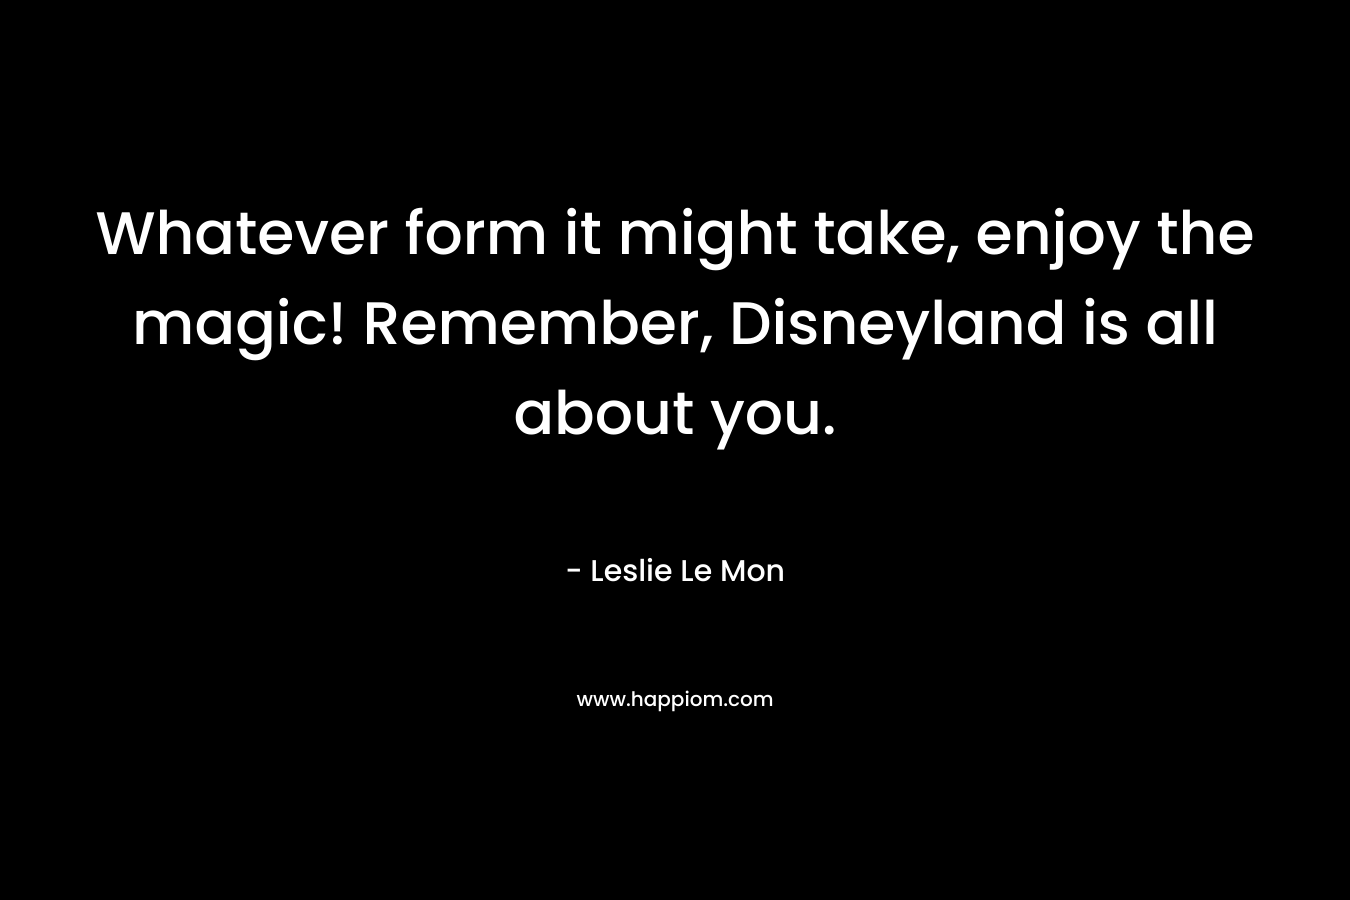 Whatever form it might take, enjoy the magic! Remember, Disneyland is all about you.